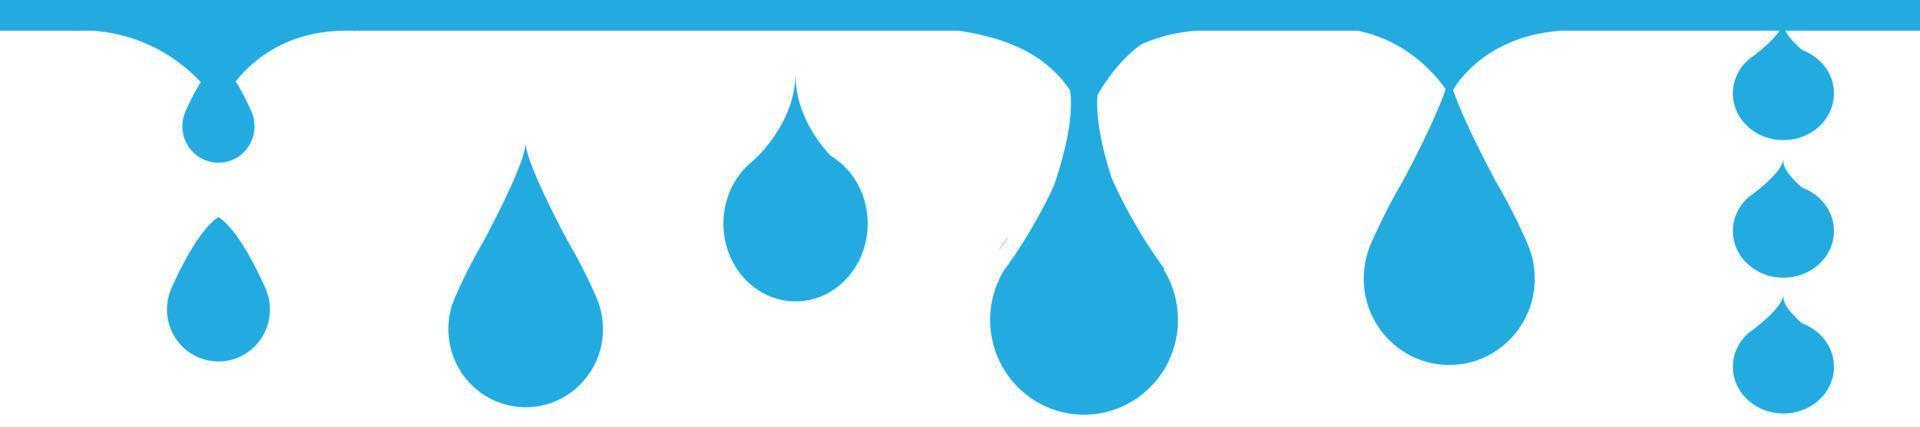 Water drops. Cartoon tears, nature splash elements. Isolated raindrop or sweat, wet droplets of dew shapes. Isolated aqua vector icons